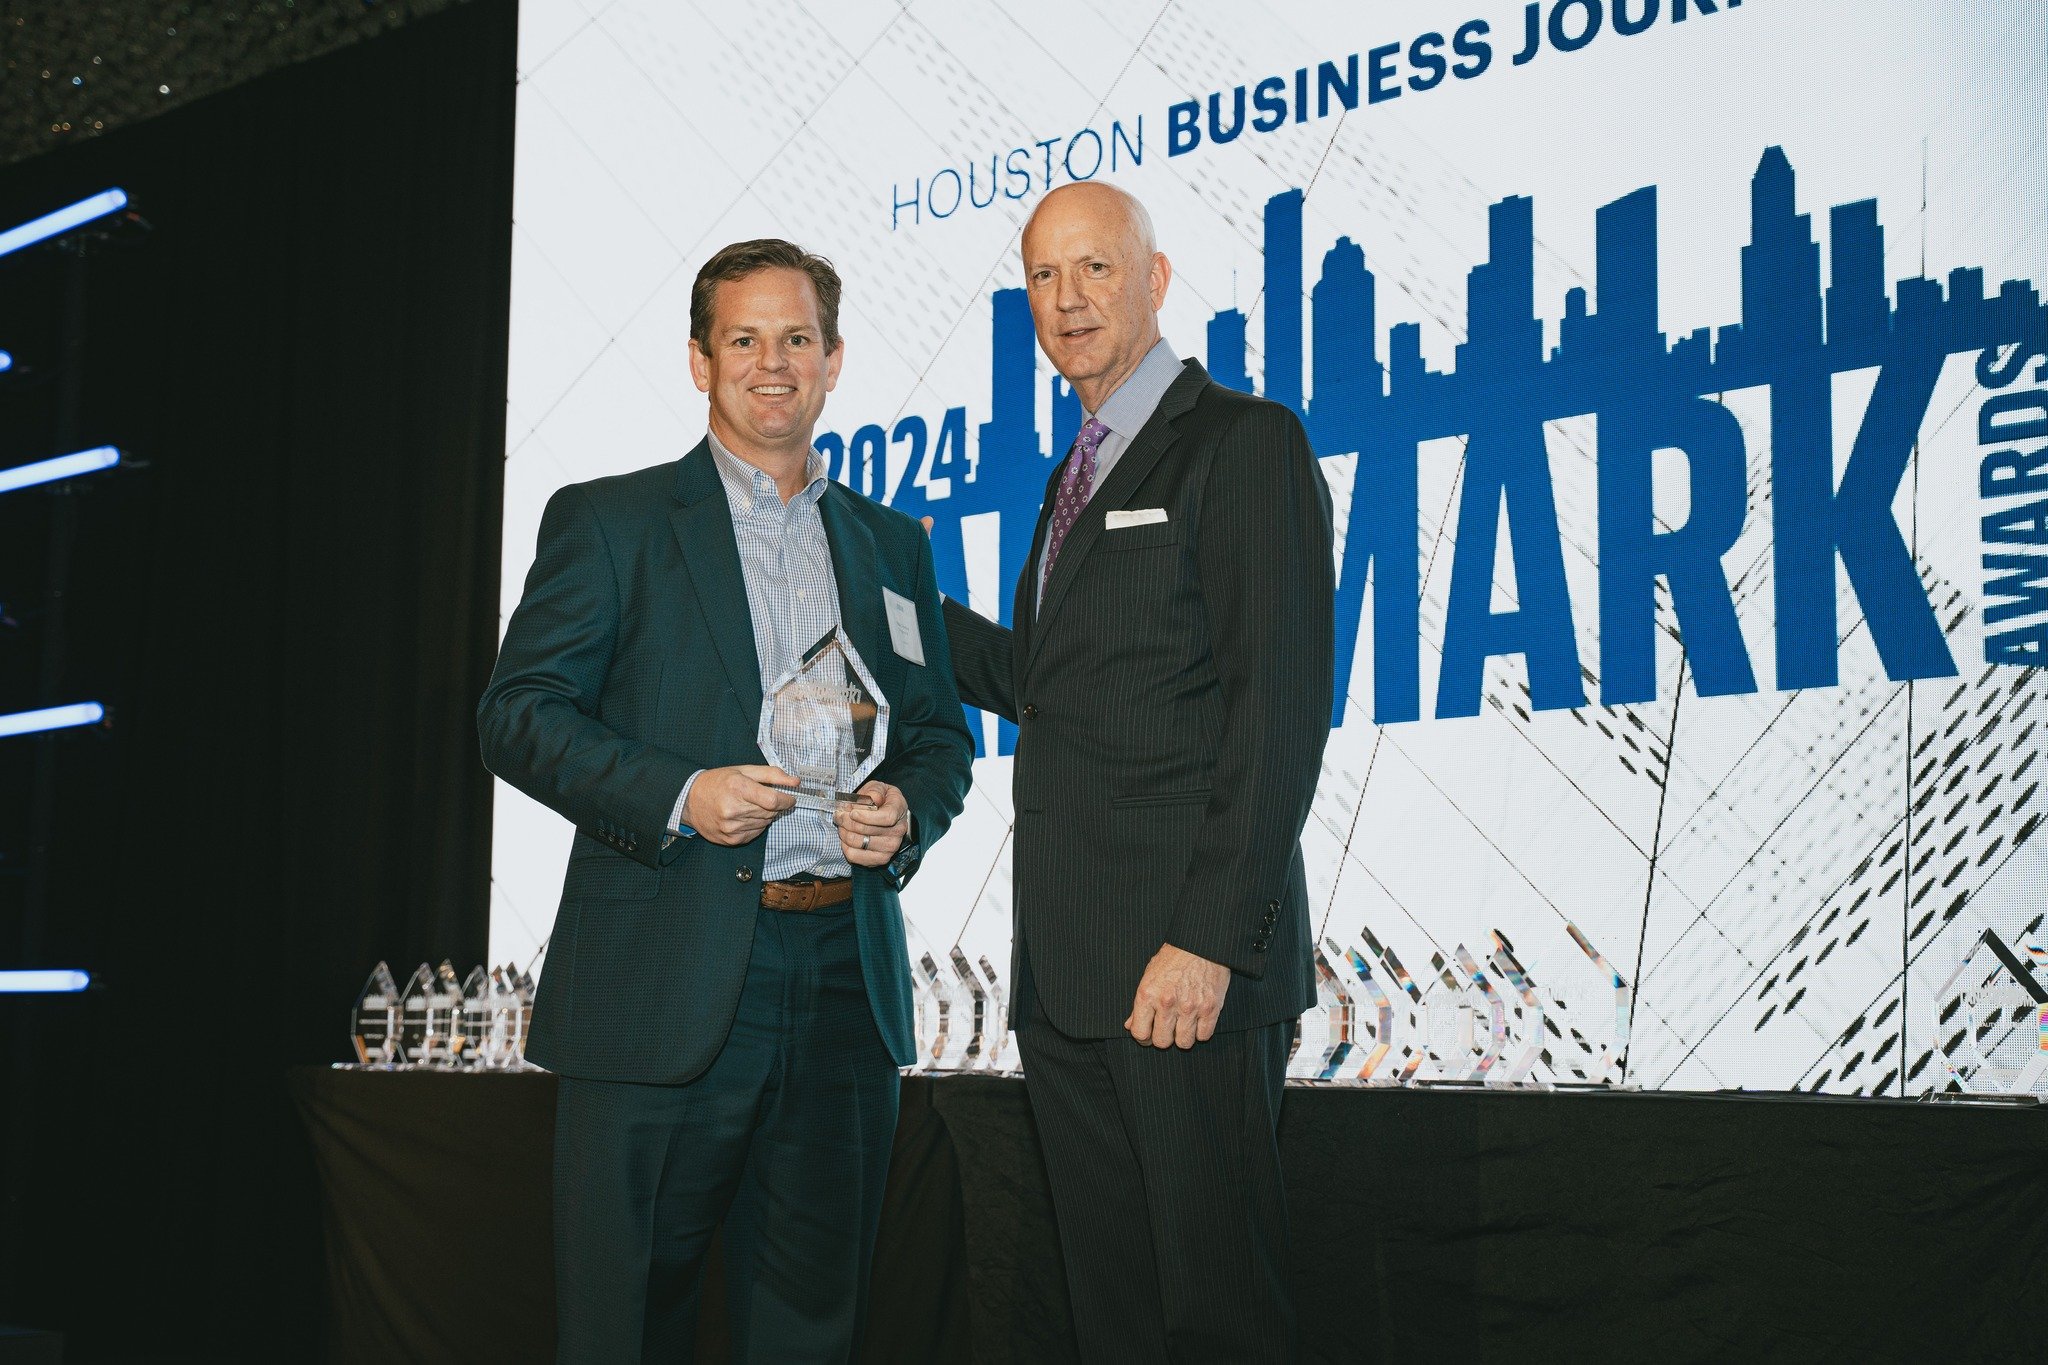 Last week we attended @houbizjournal 's Landmark Award event to celebrate The Great 290 Distribution Center as a finalist in the Industrial category. A big thanks to all the teams that played a part in making this a landmark for not only Pagewood but